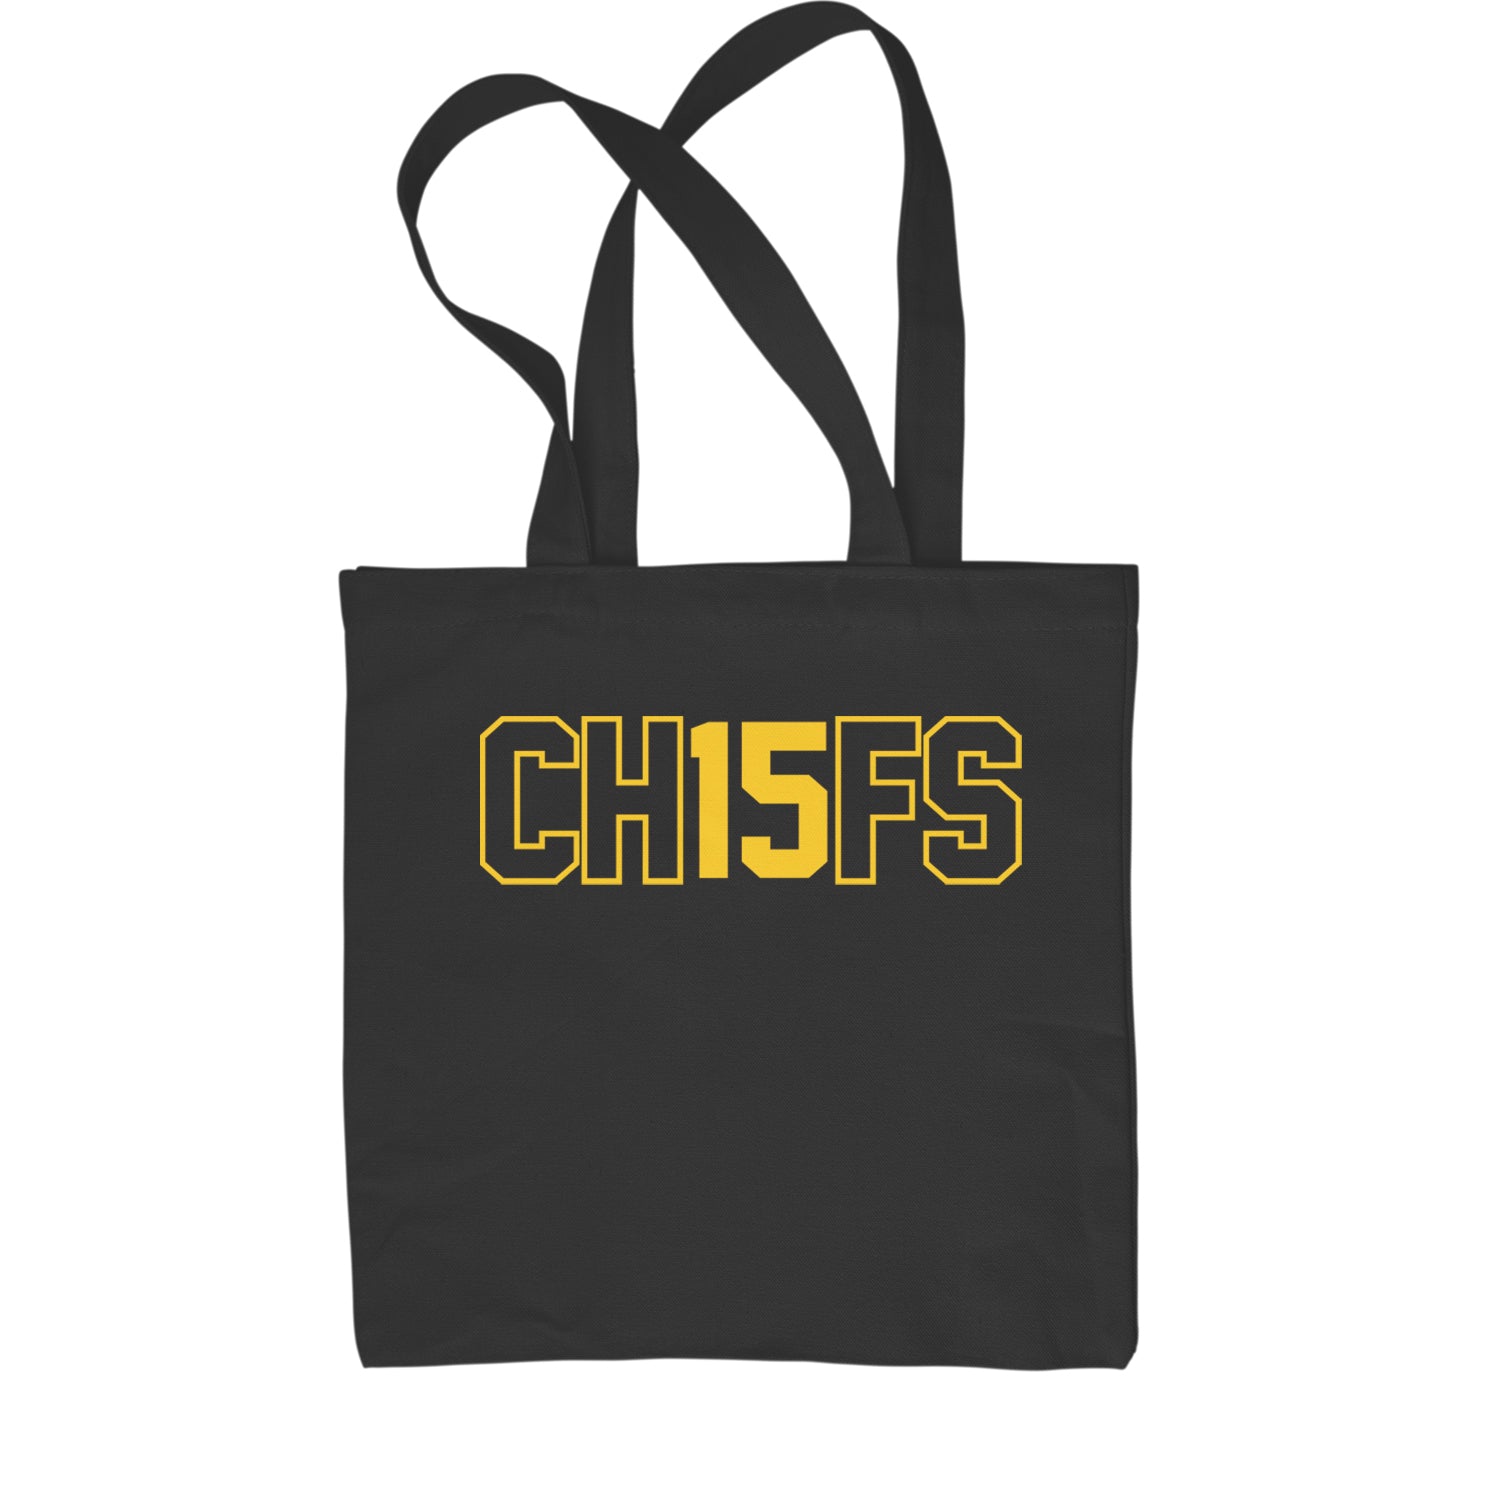 Ch15fs Chief 15 Shirt Shopping Tote Bag ass, big, burrowhead, game, kelce, know, moutha, my, nd, patrick, role, shut, sports, your by Expression Tees